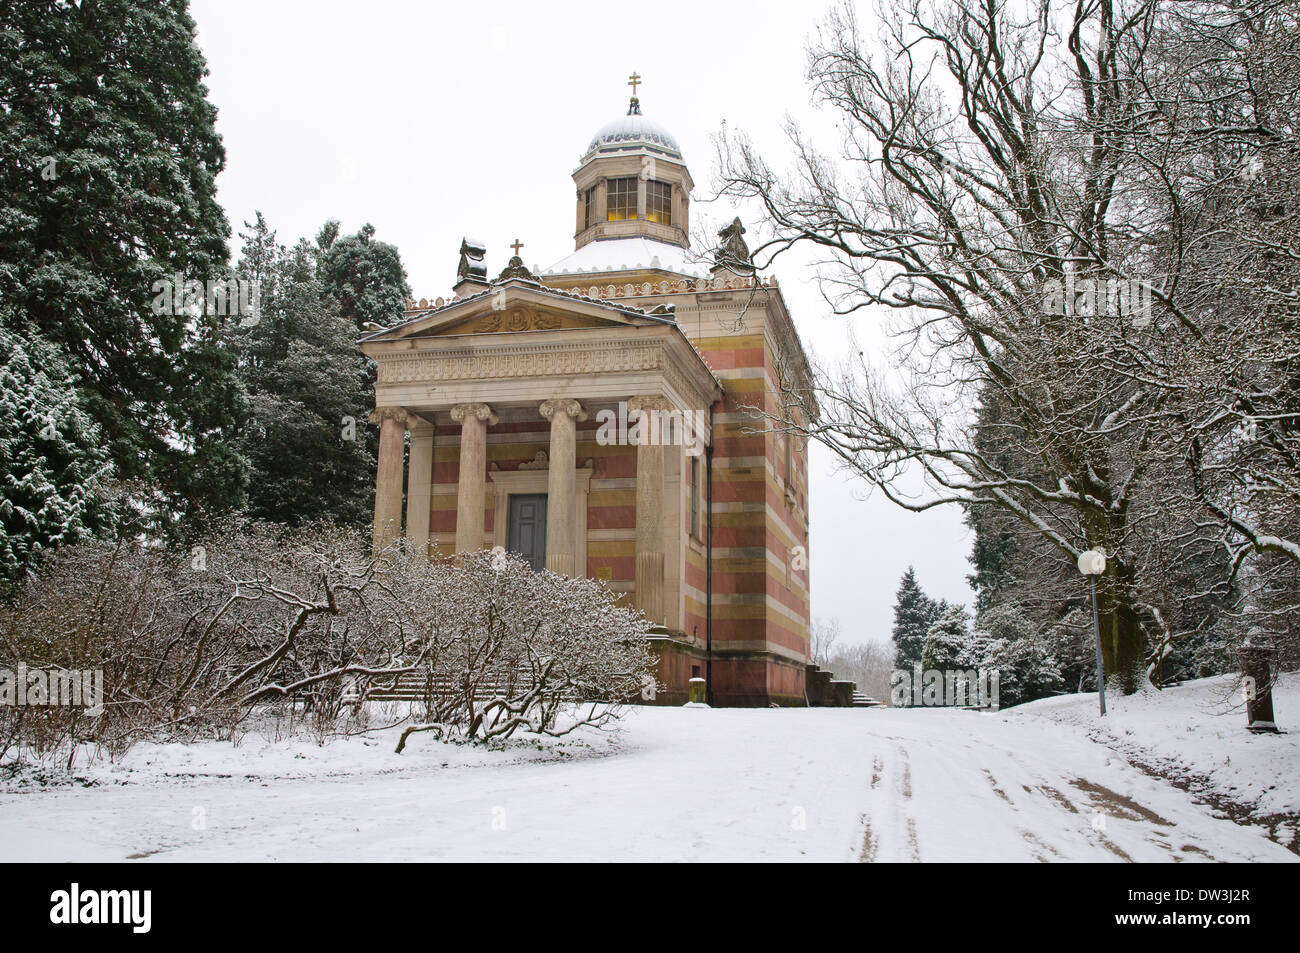 The Stourdza Romanian Orthodox Chapel in the snow. Michaelsberg, Baden-Baden, southern Germany. December. Stock Photo